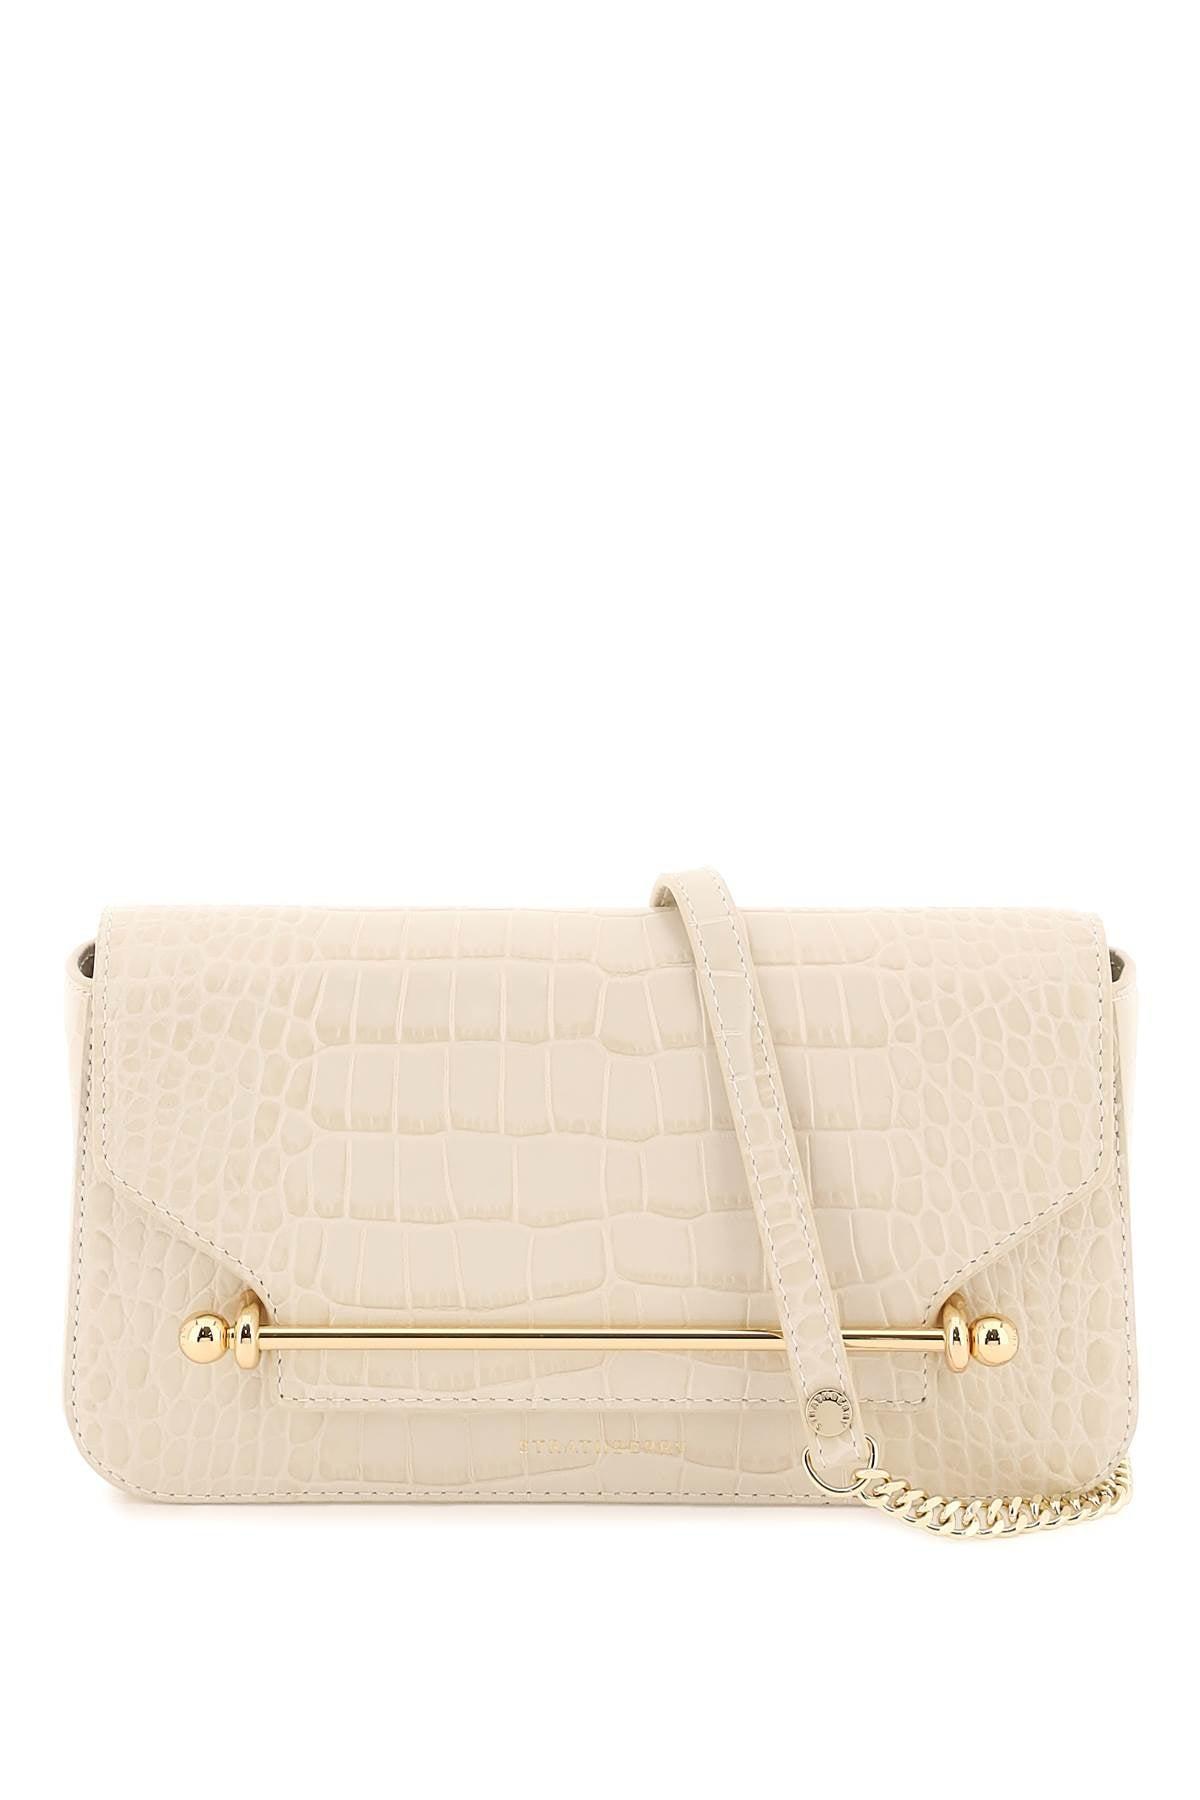 Strathberry East/west Baguette Bag in Natural | Lyst